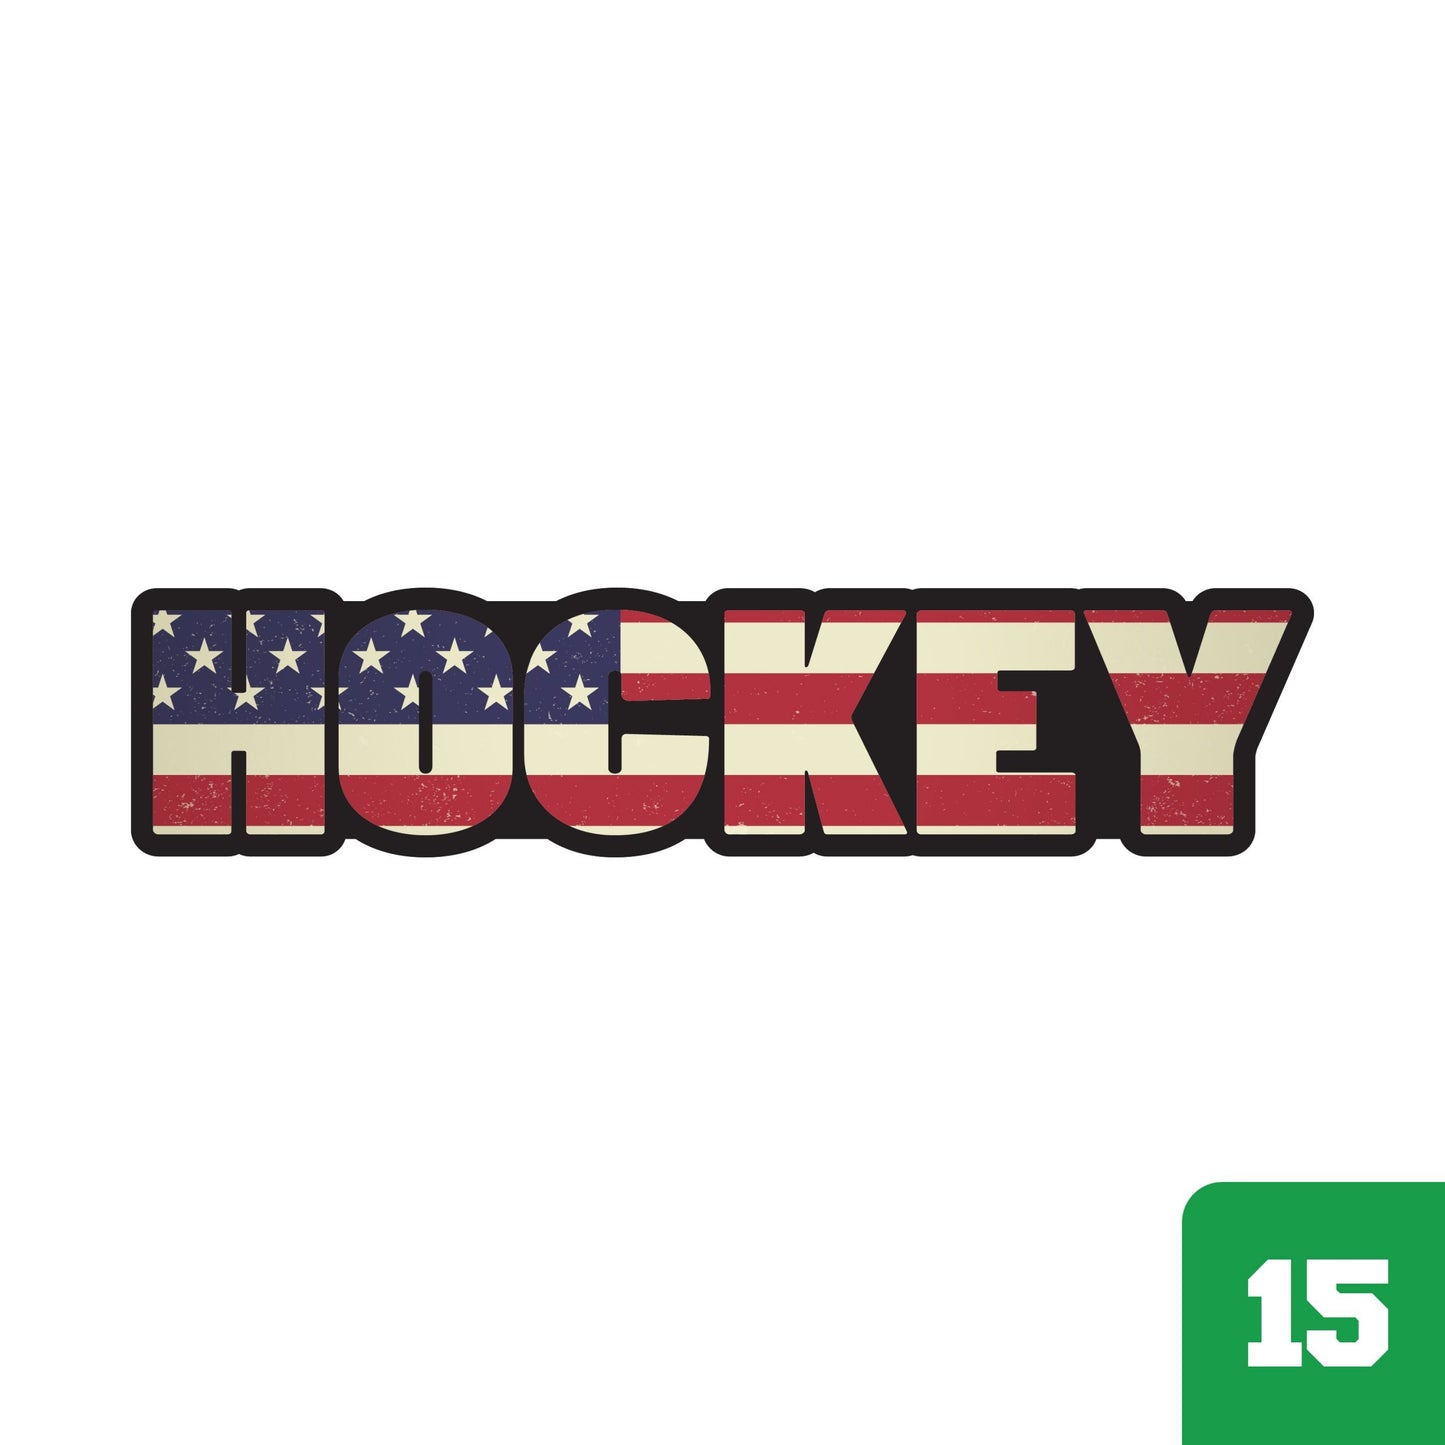 Awesome Hockey Stickers